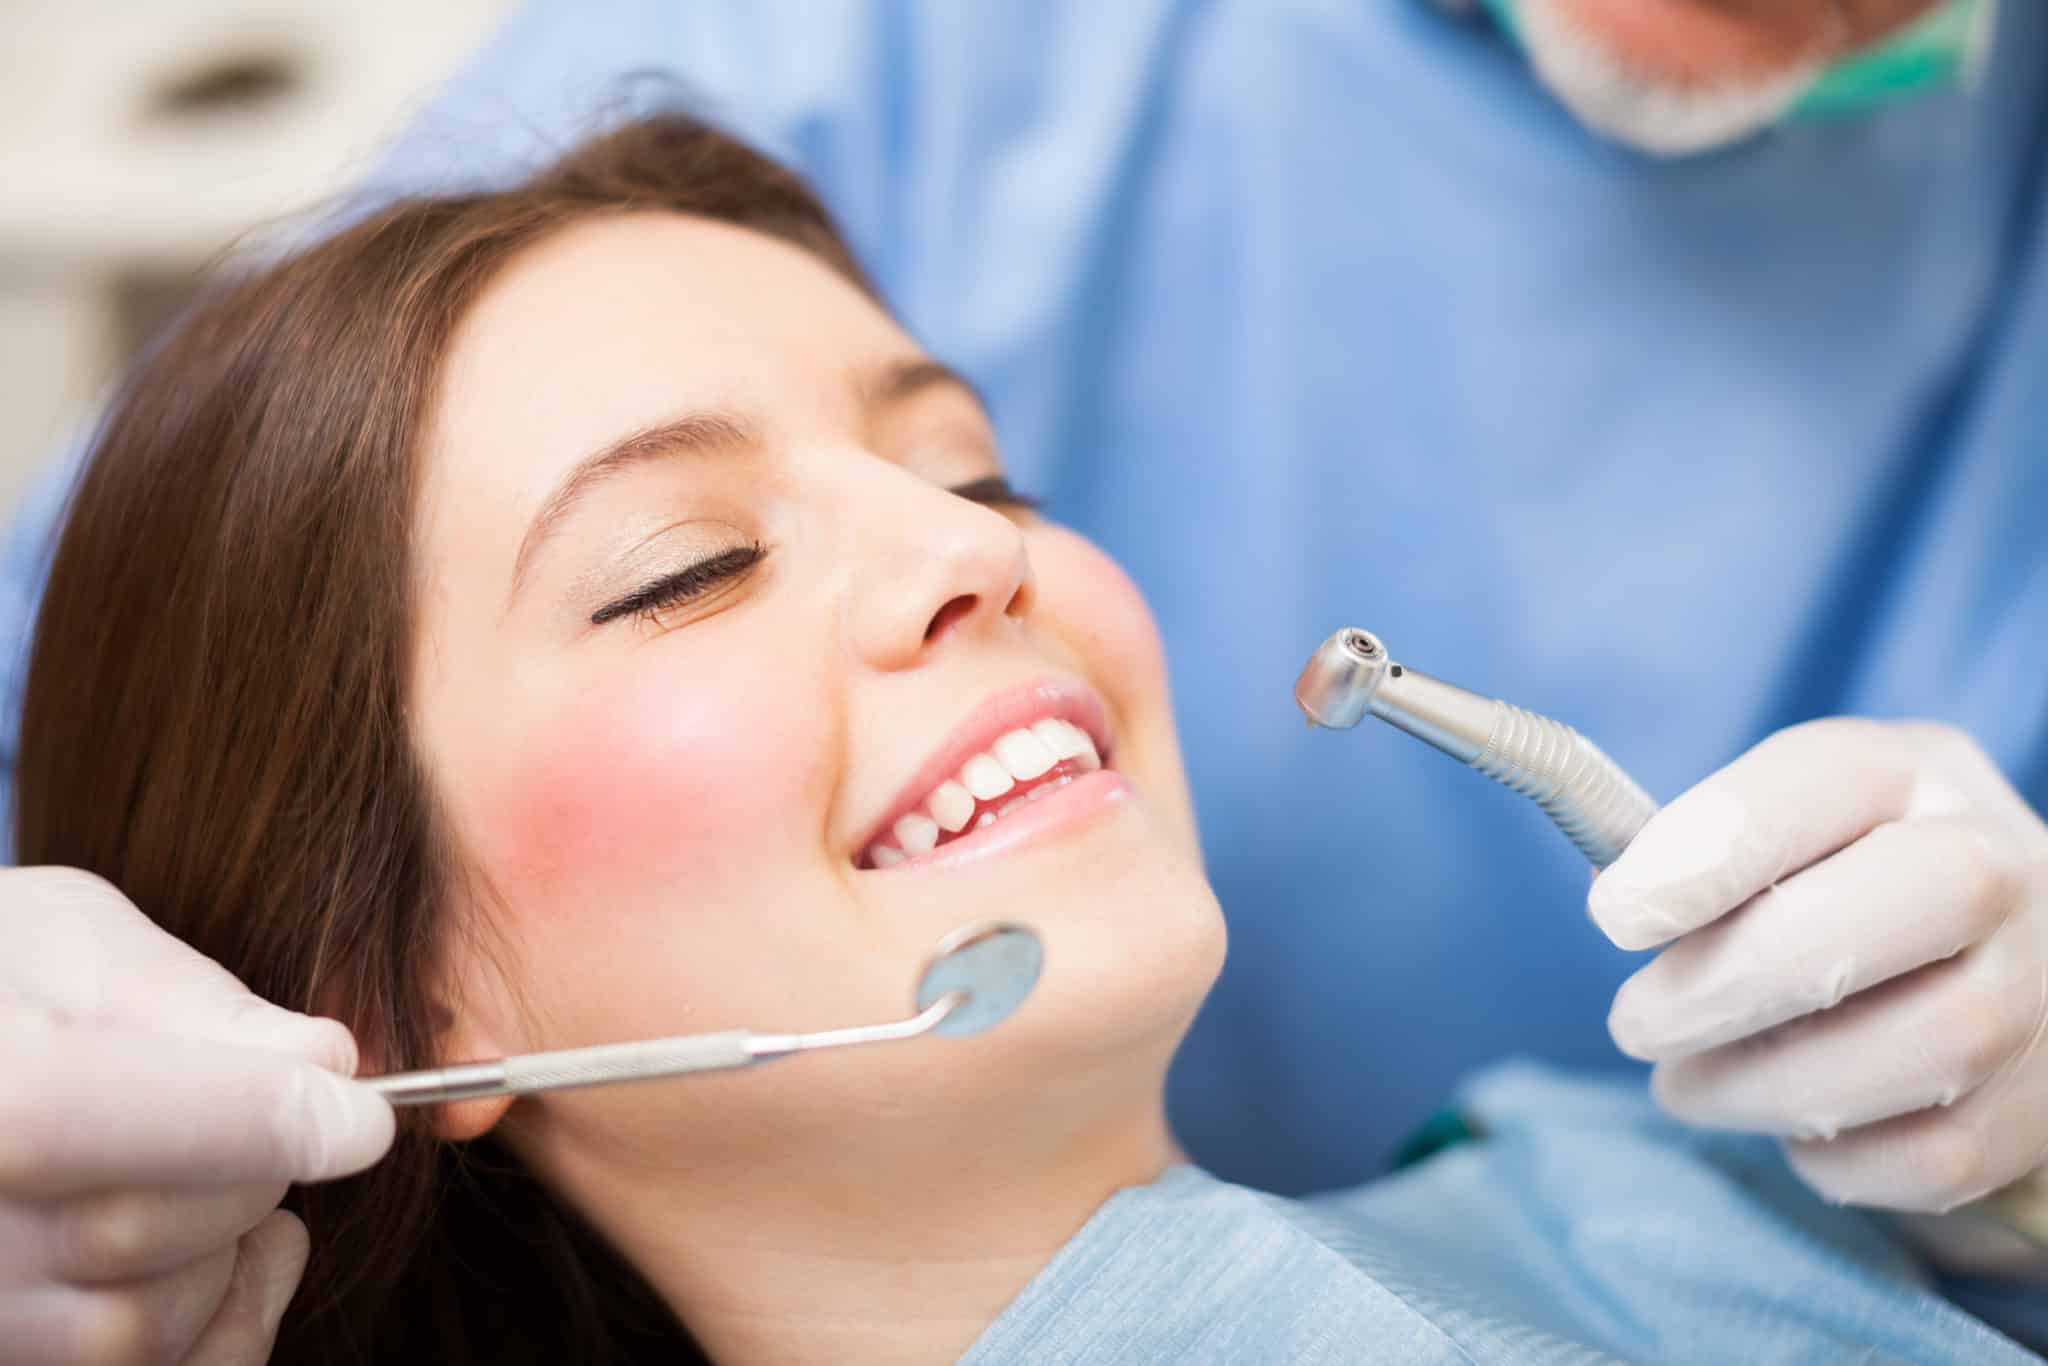 How to Get the Dental Care You Need Without Insurance